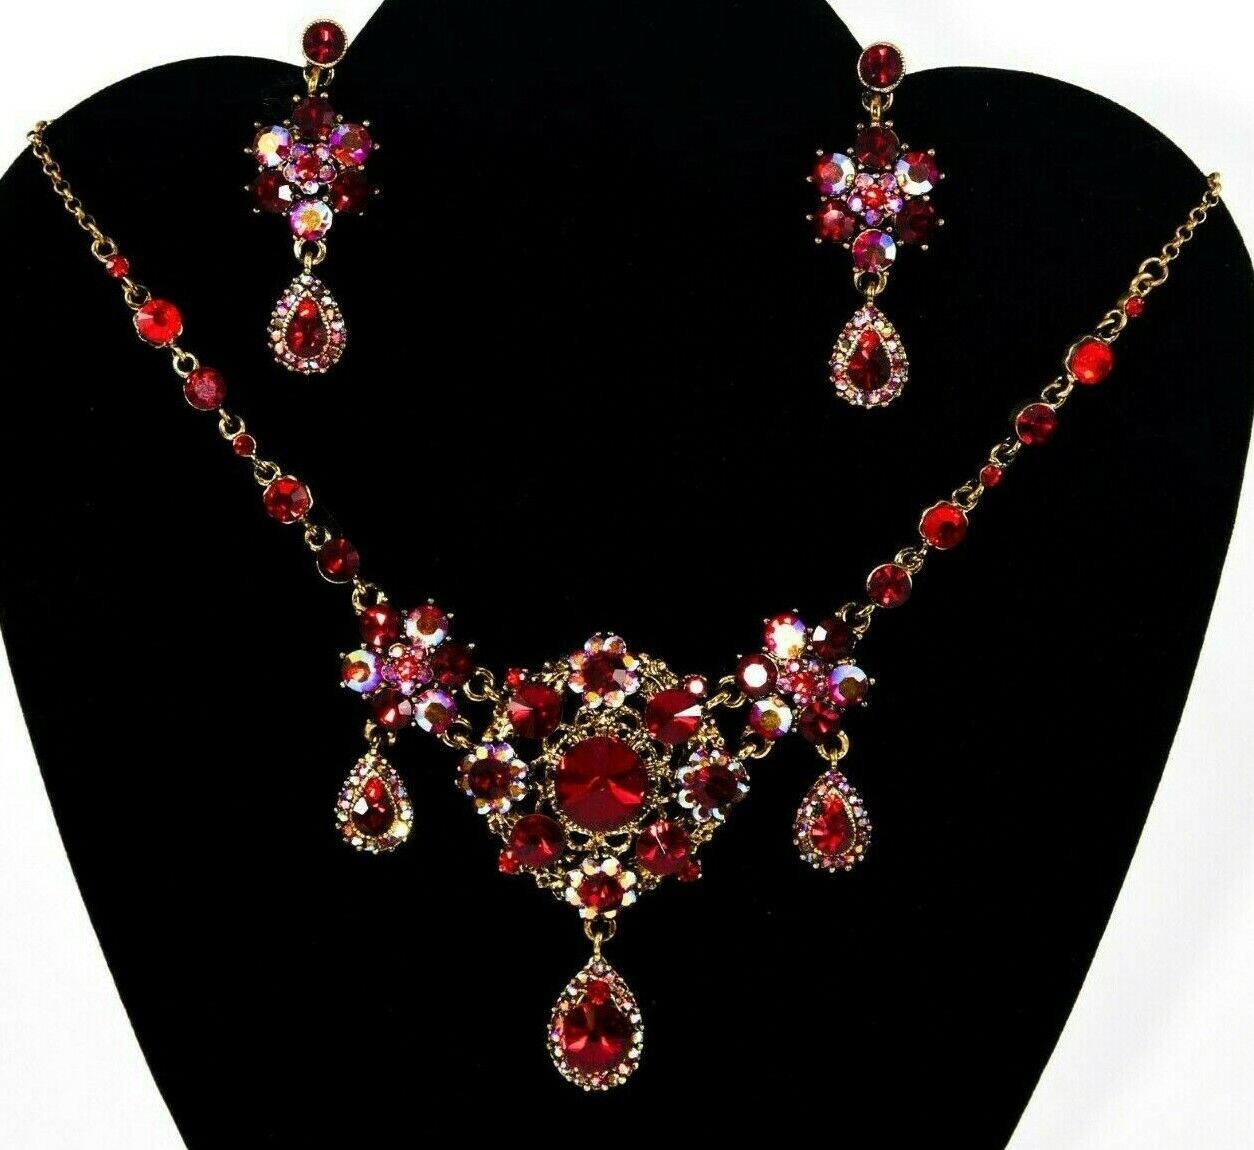 Stunning Red Rhinestone Crystal Necklace and Earring Set Victori